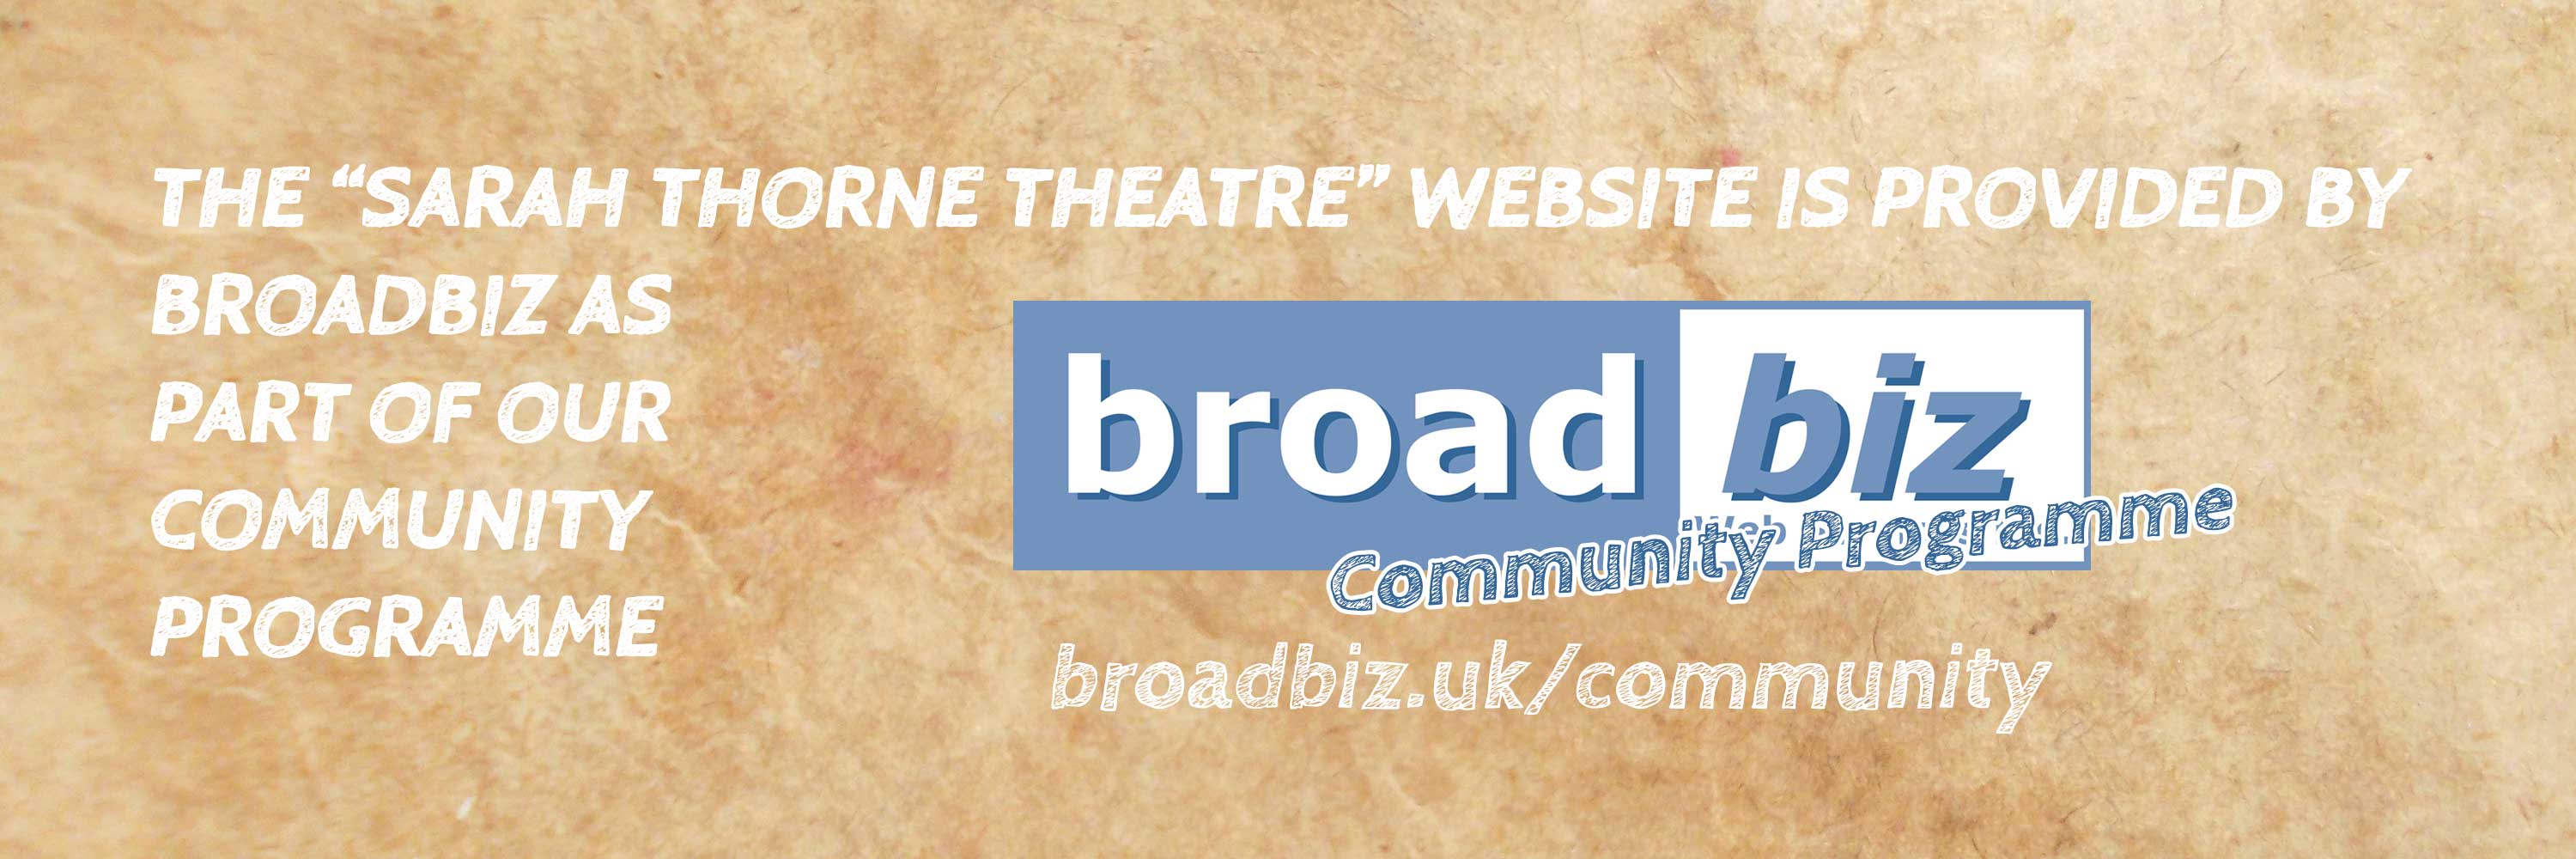 The Sarah Thorne Theatre website is provided by Broadbiz as part of our Community Programme